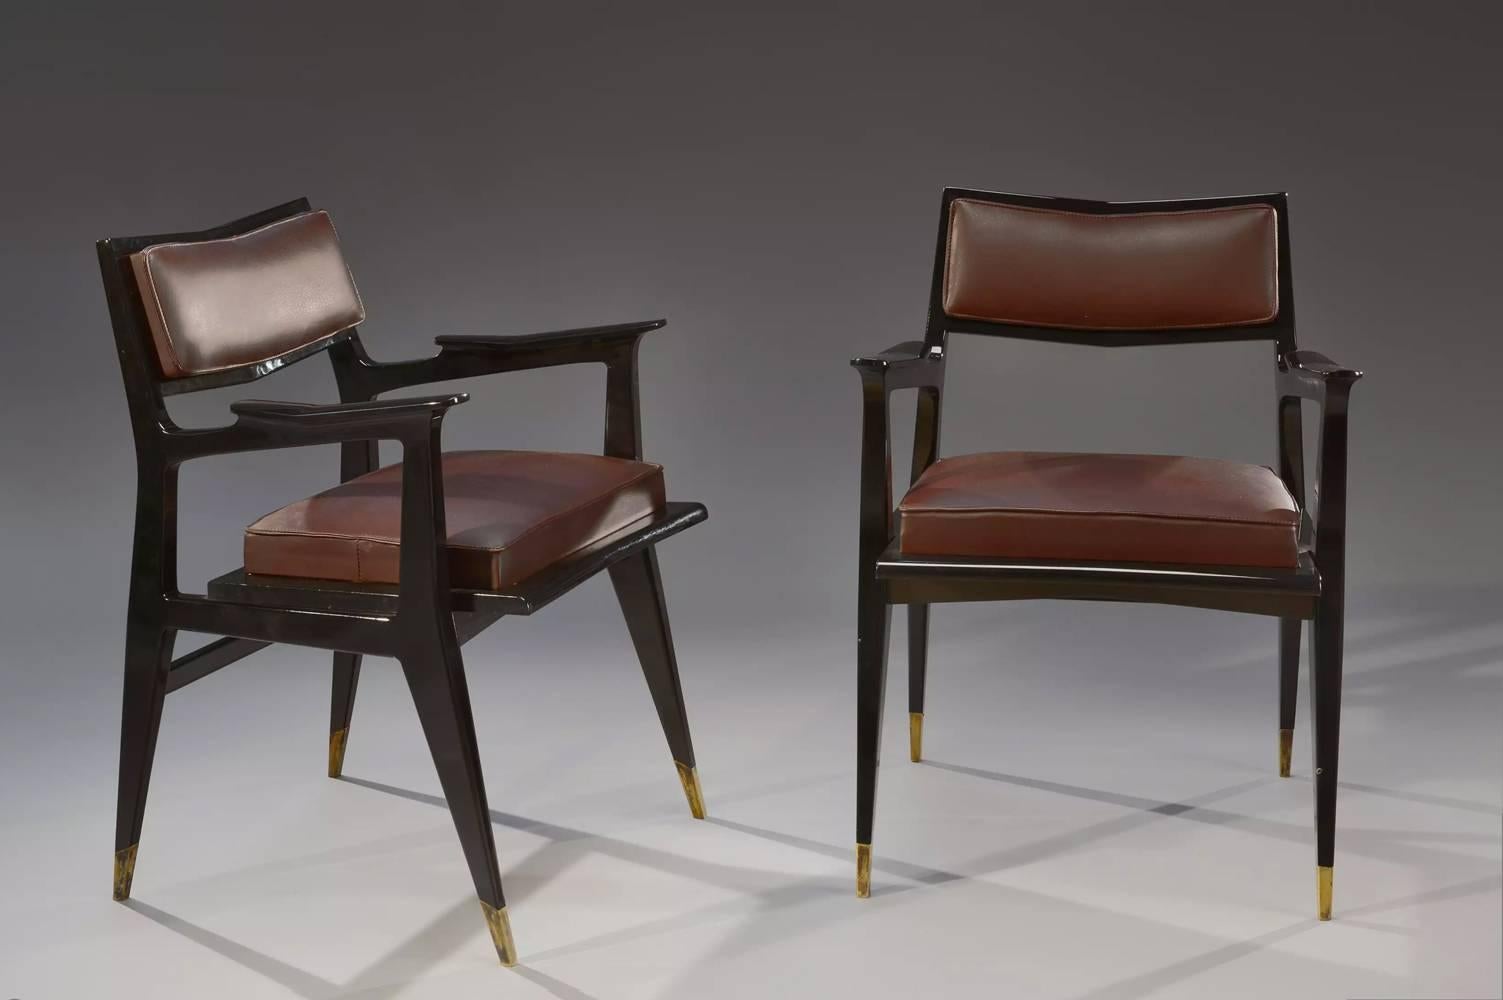 Raphaël (1912-2000).

Beautiful and rare pair of chairs in black lacquer terminated with gilt bronze sockets.
Seats and backs upholstered in double stitch burgundy leather.
Signed 